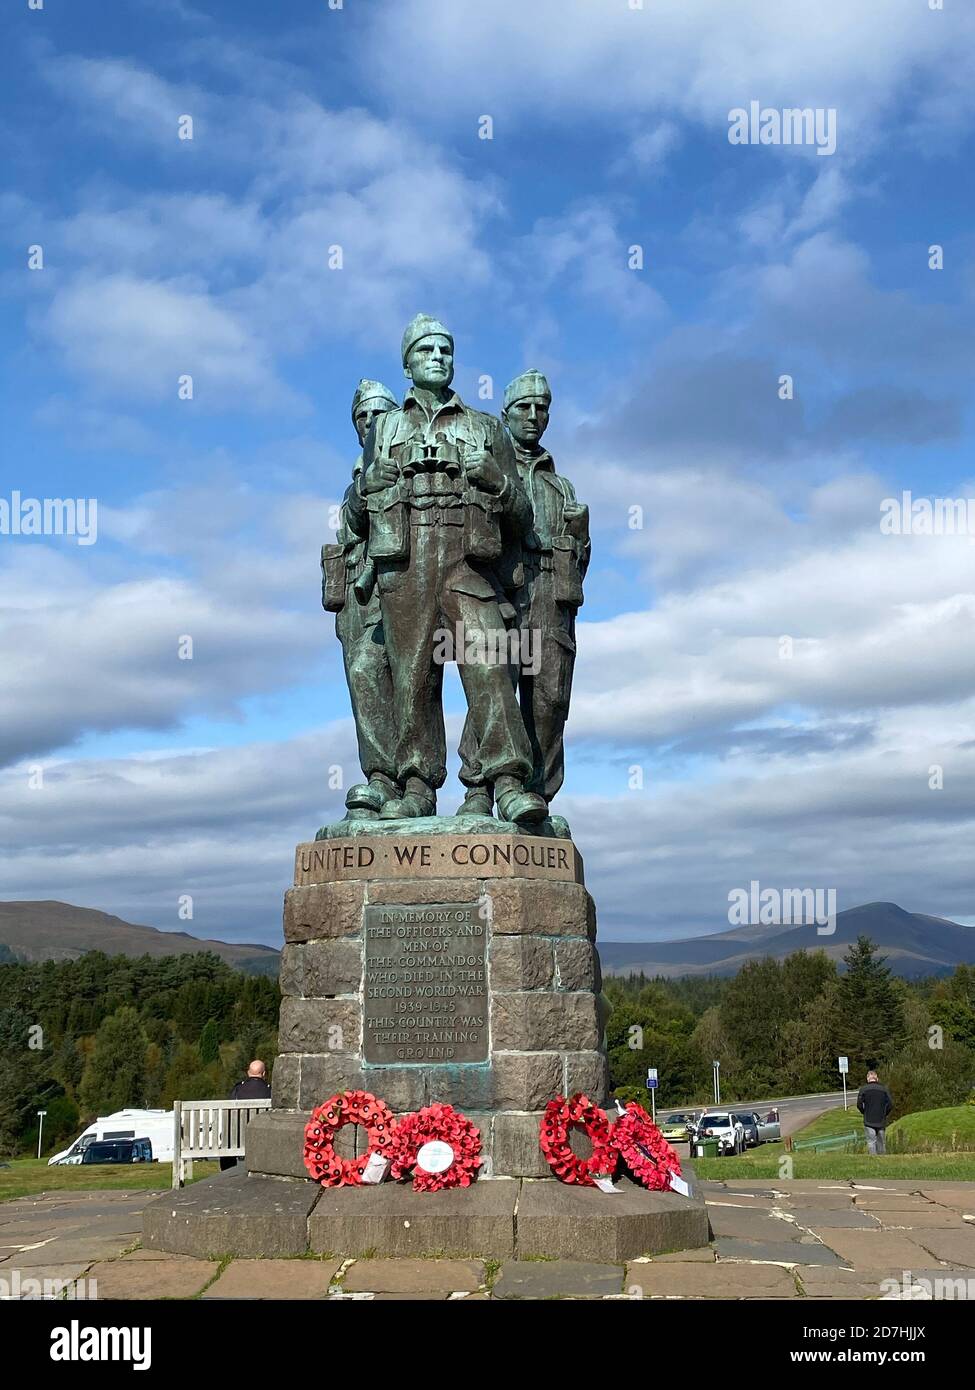 COMMANDO MEMORIAL at Lochaber, Scotland, unveiled in 1952, over looking the Commando Training Depot at Achnacarry Castle established in1942. Stock Photo